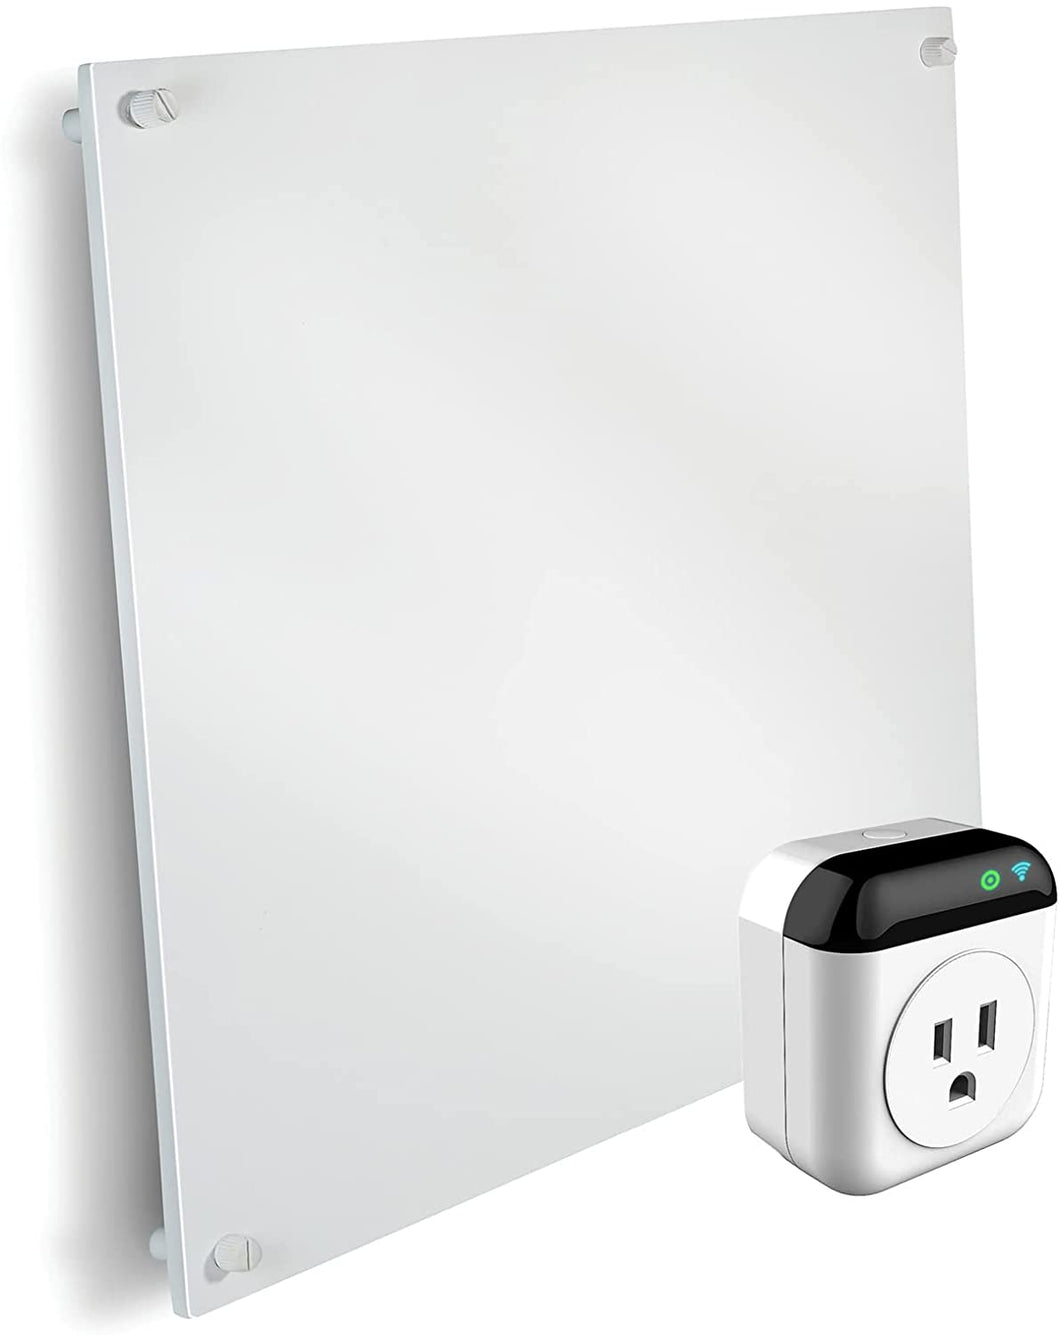 400W Wall Mounted Heater Panel - with WiFi Thermostat